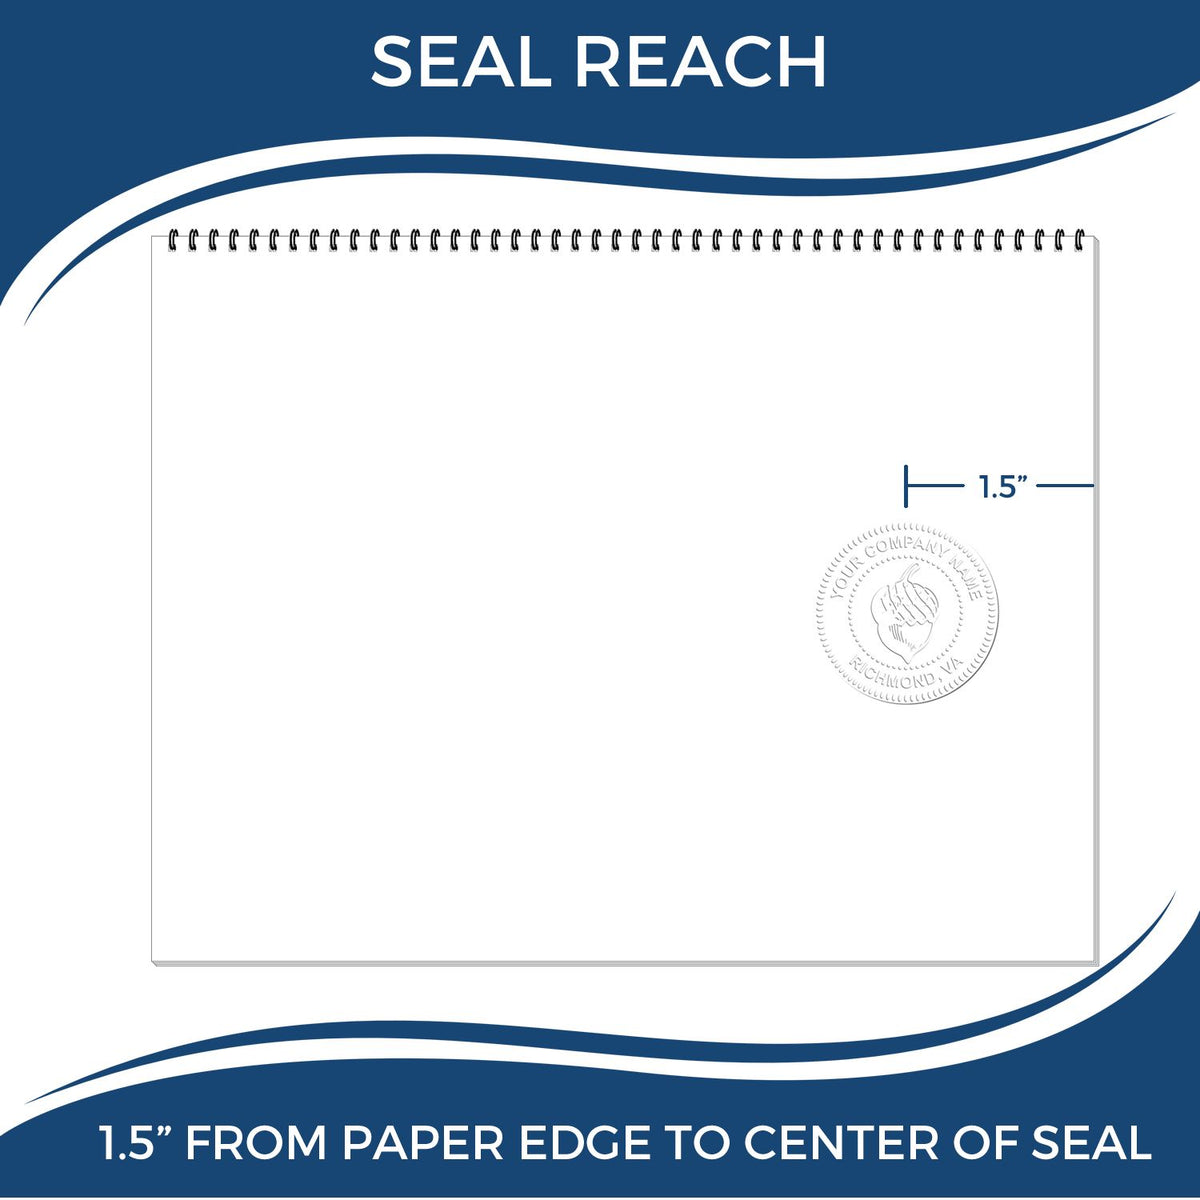 An infographic showing the seal reach which is represented by a ruler and a miniature seal image of the Gift Vermont Geologist Seal